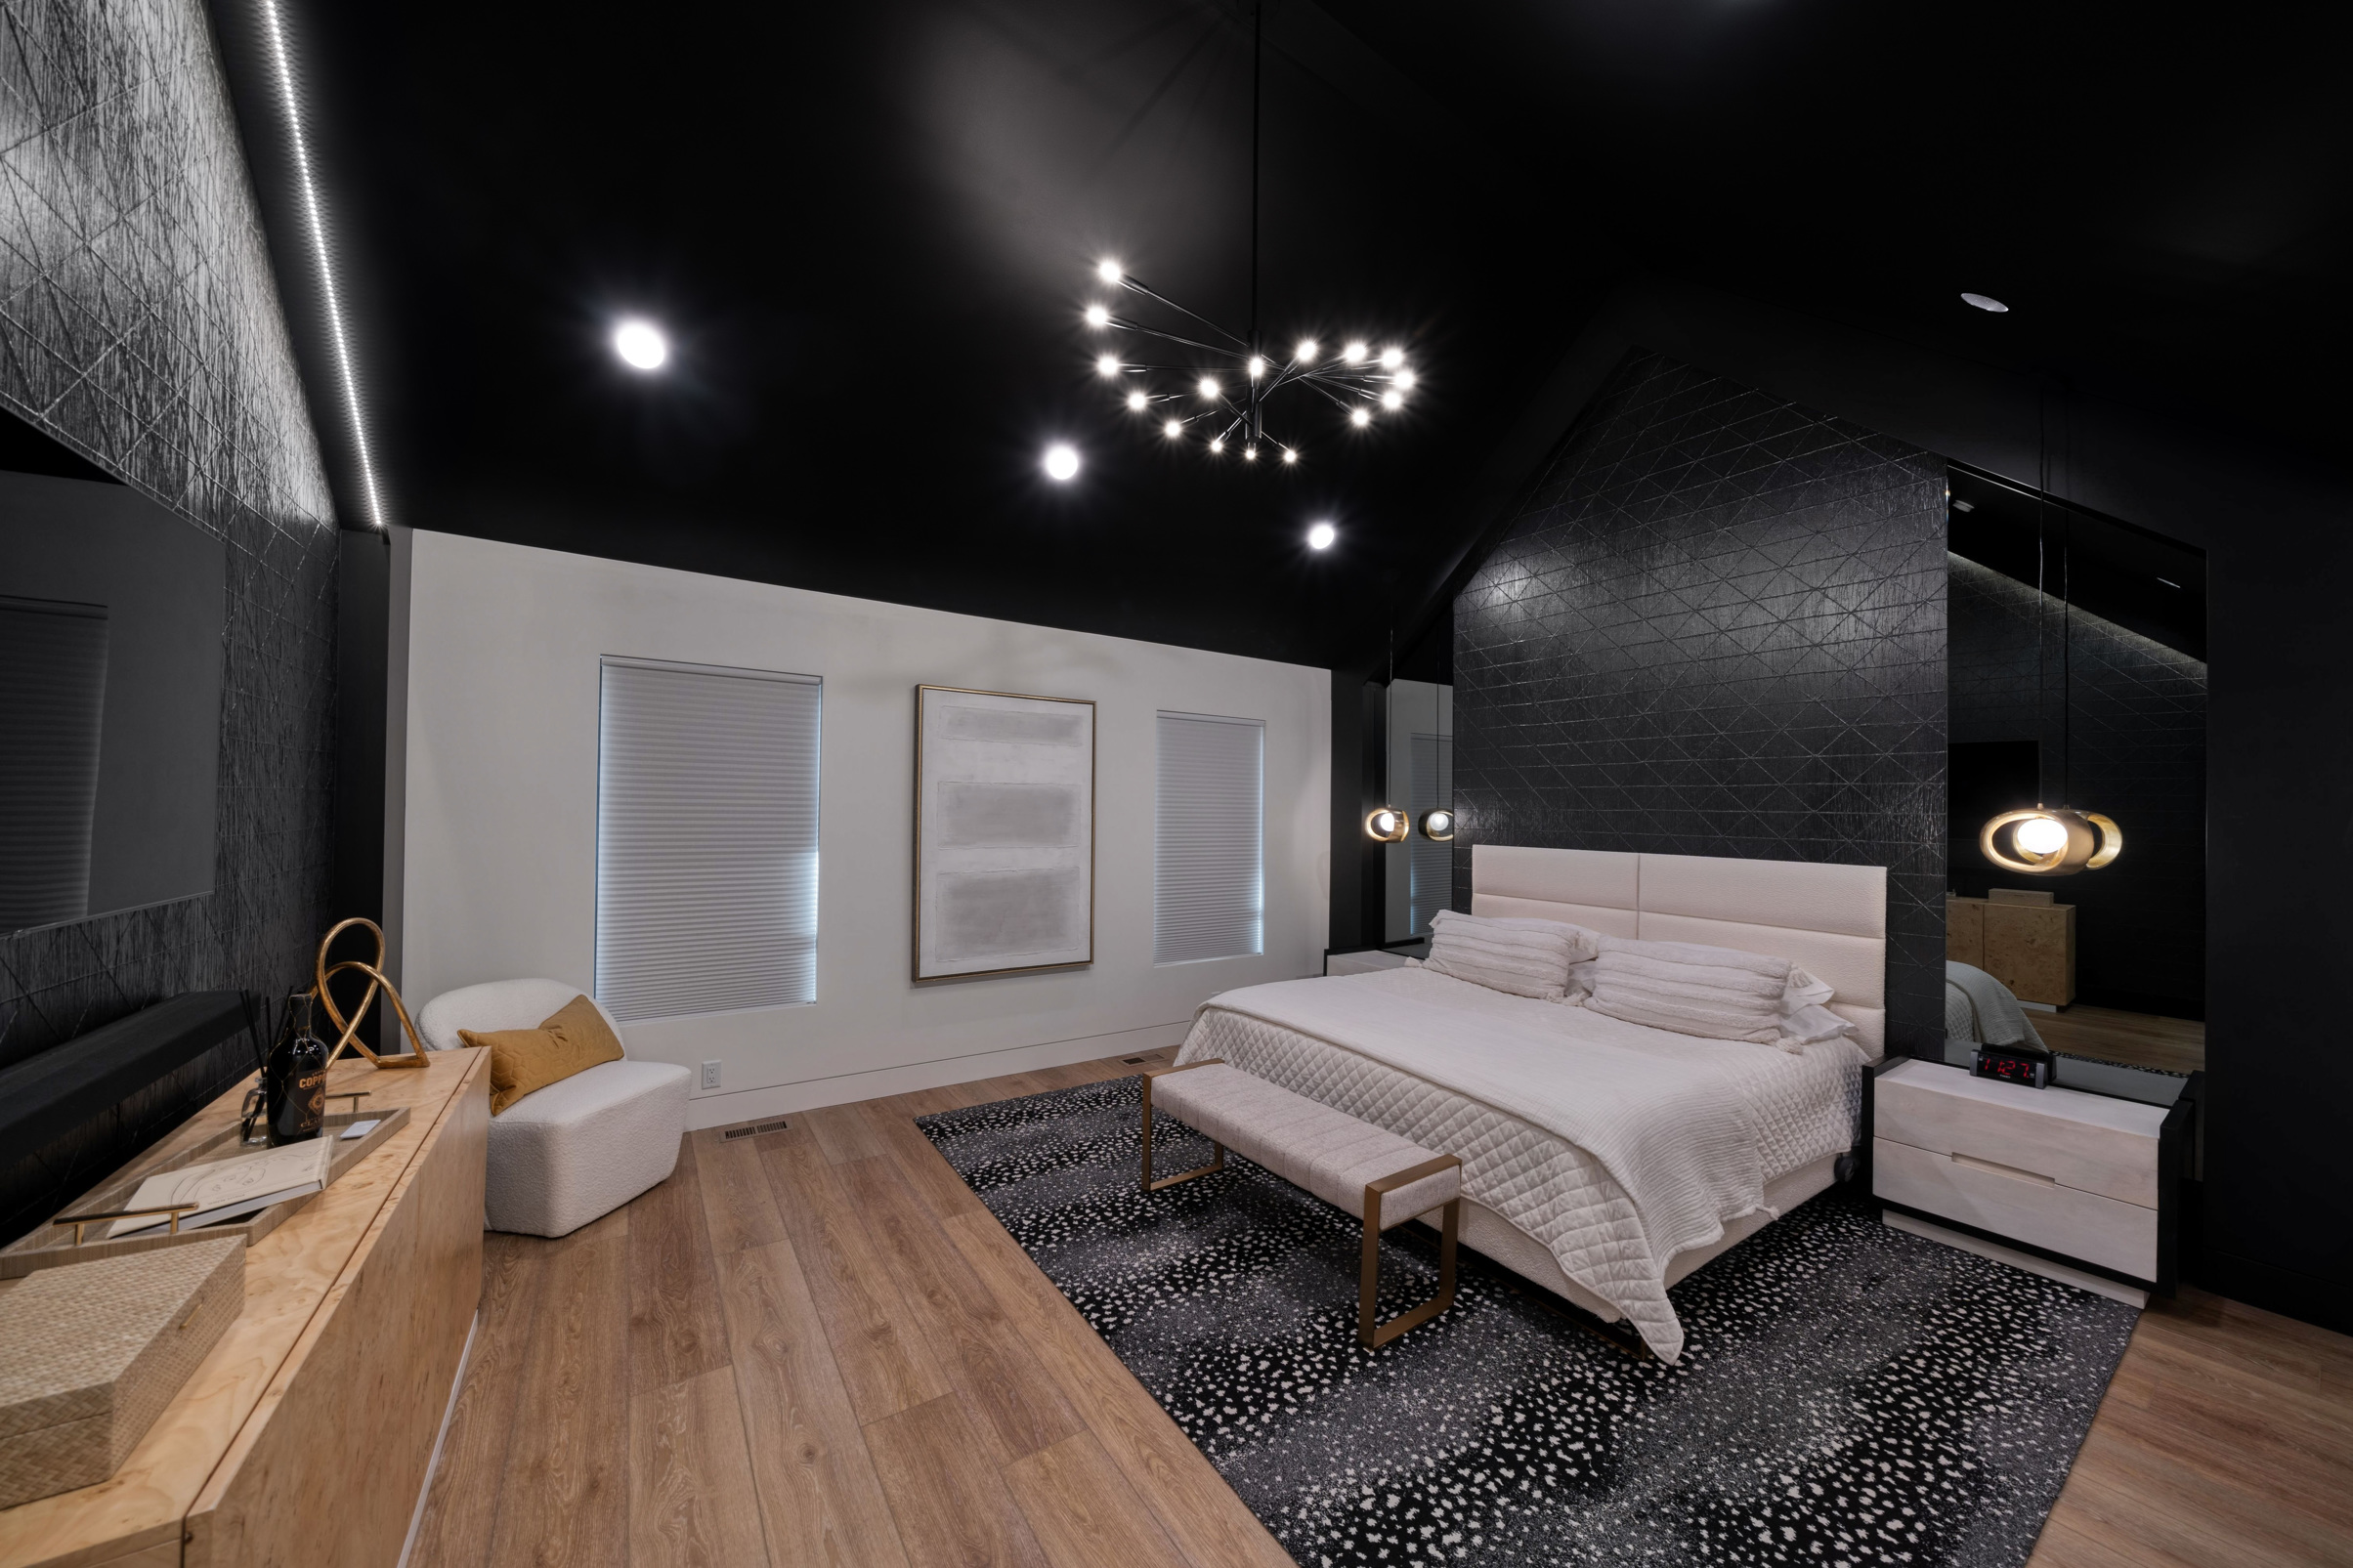 Bedroom with wooden floors, modern chandelier, and dark ceiling with recessed lighting